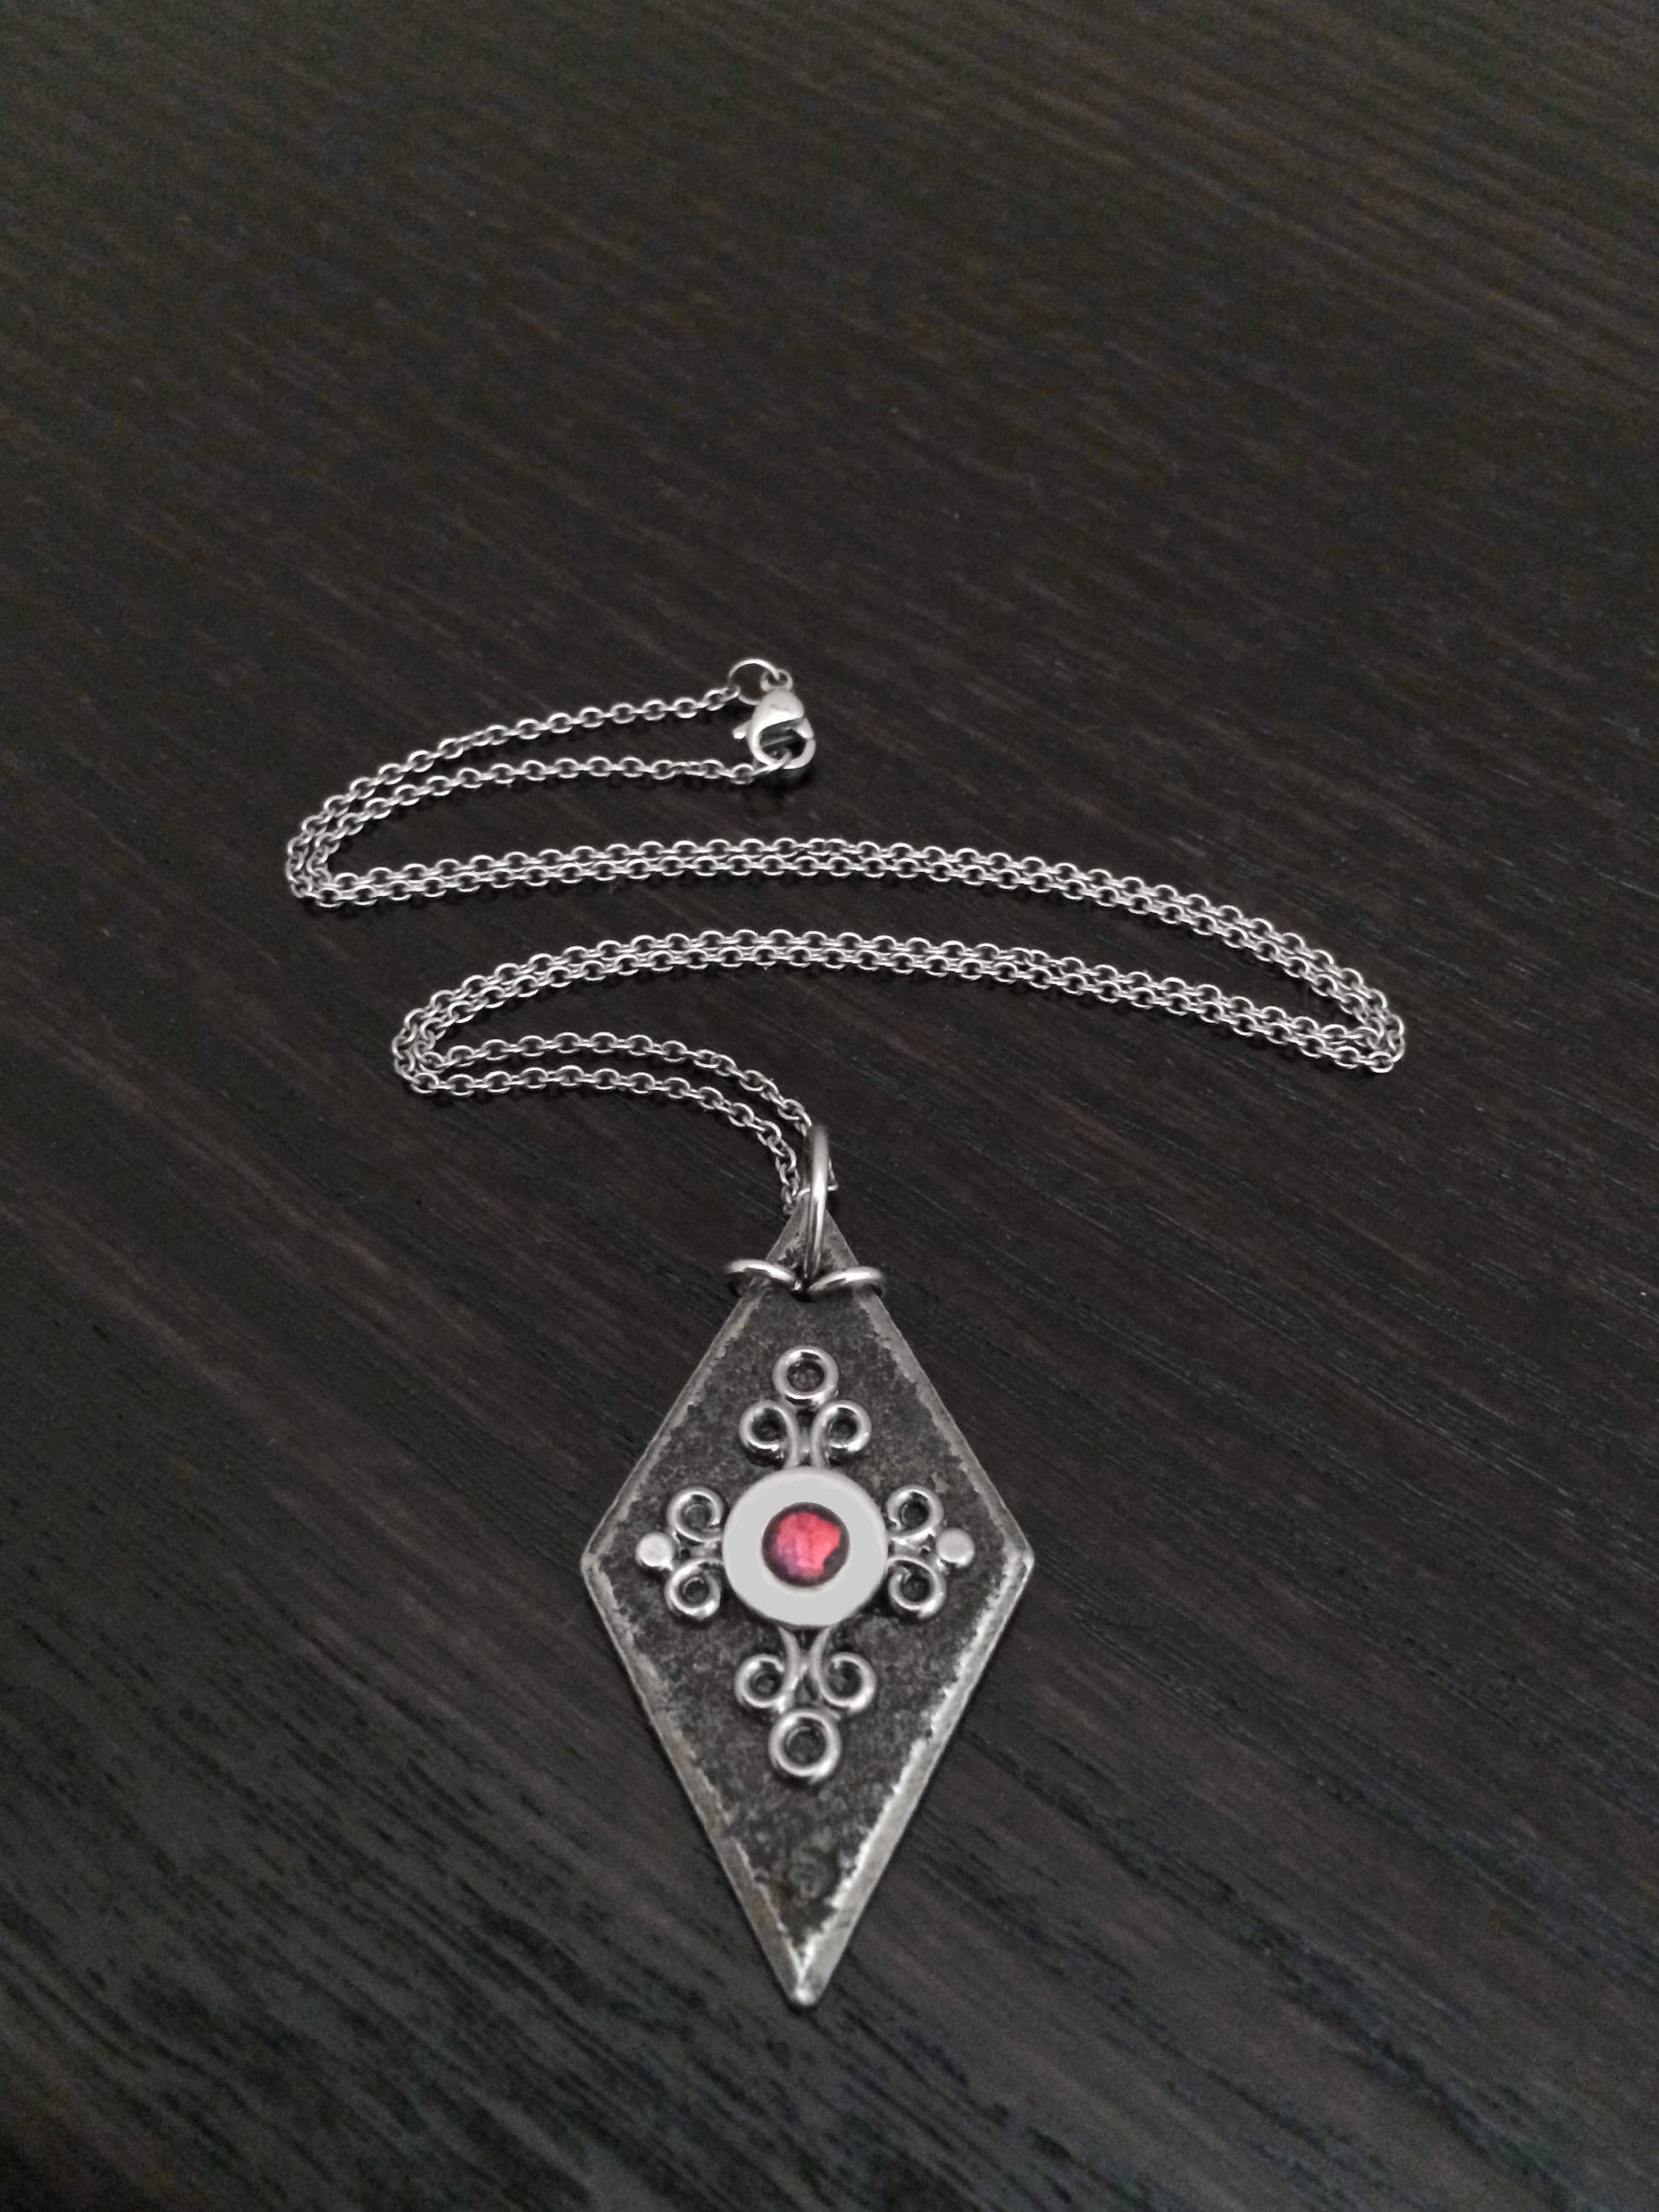 As seen on The Vampire Diaries Bonnie Necklace, Medieval Black Diamond Shaped Pendant, Crimson Red and Black Jewelry  Stainless Steel Chain